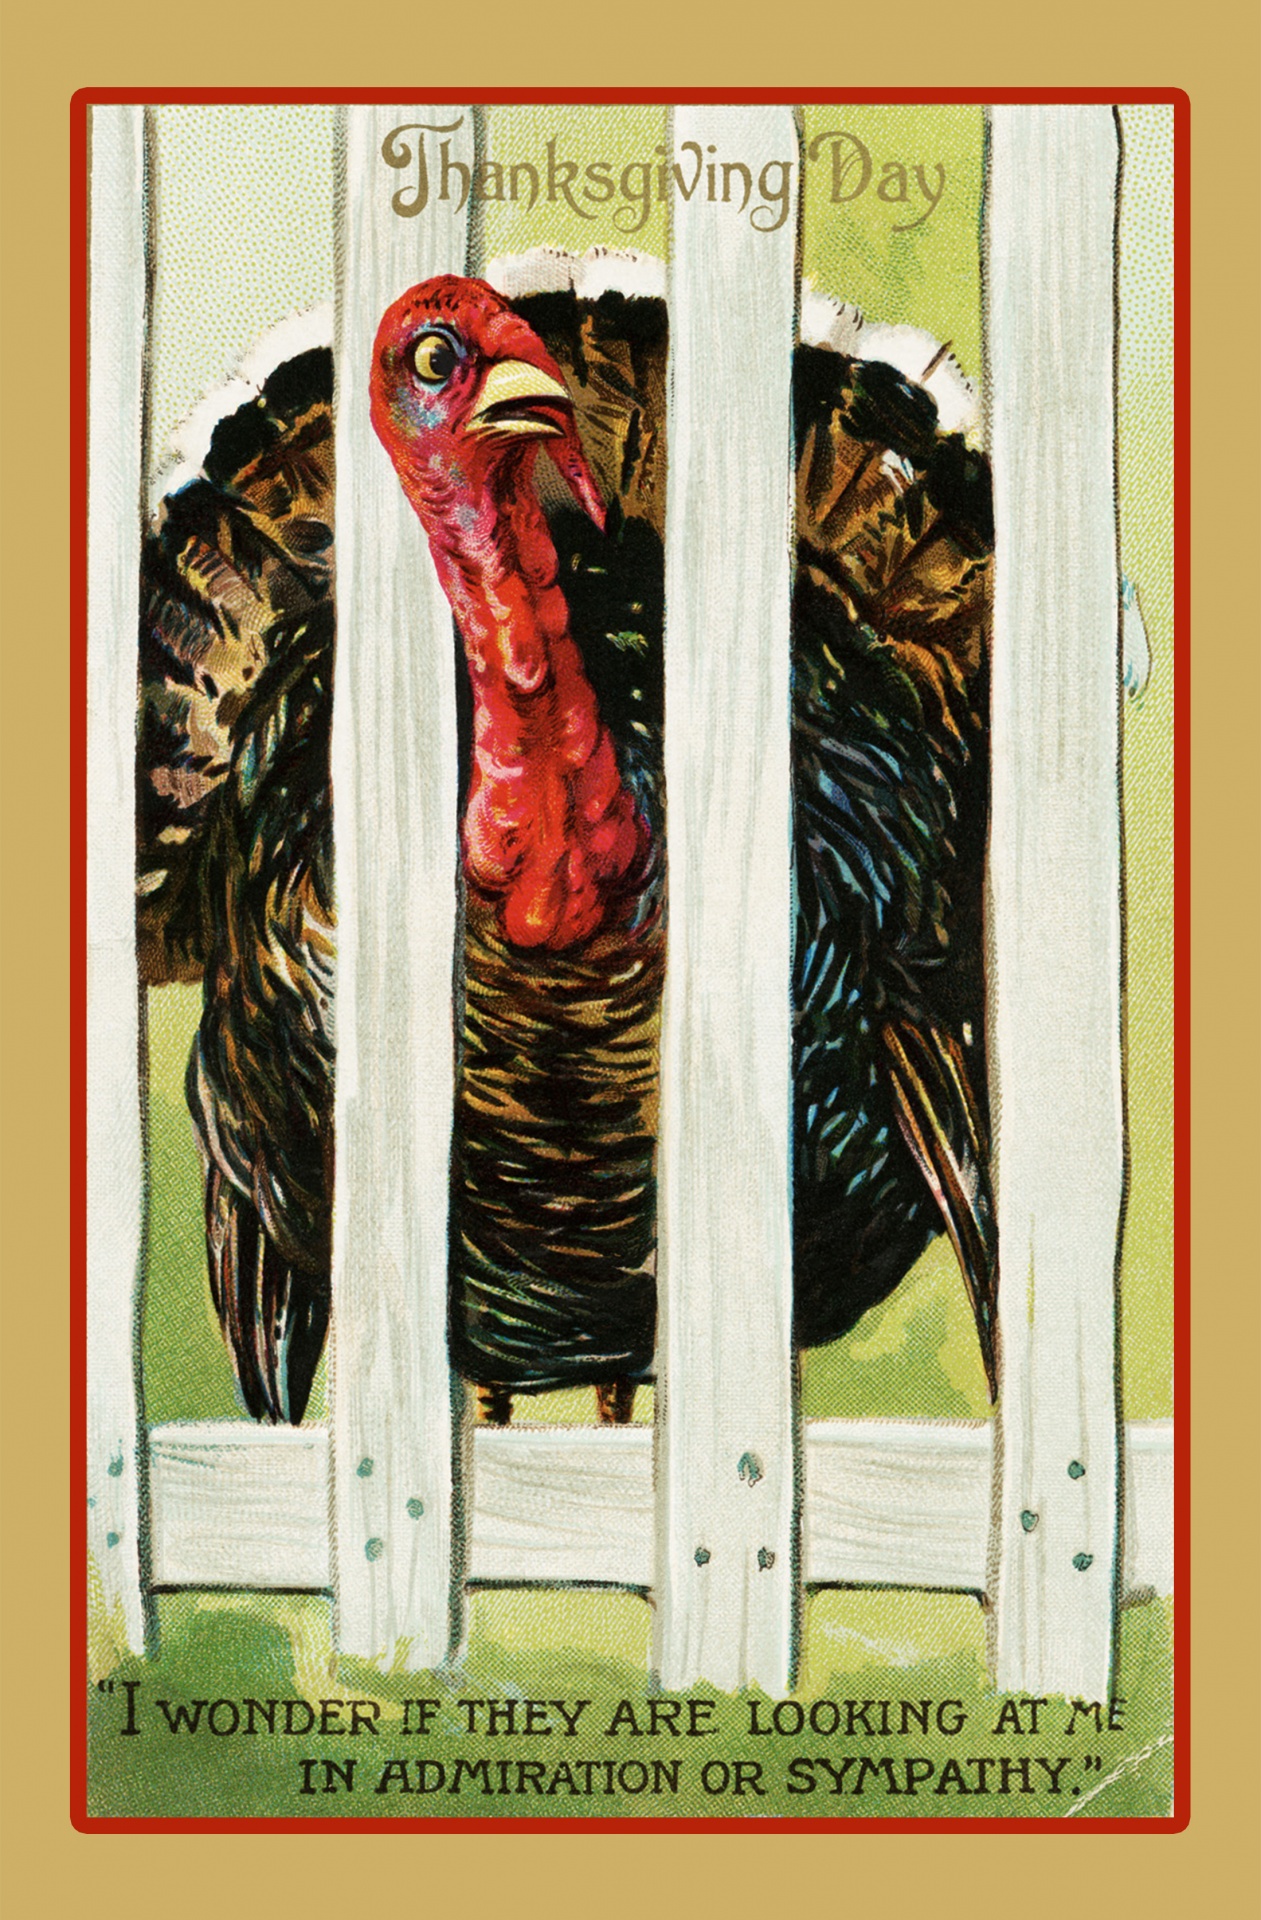 Vintage thanksgiving day card with turkey fun, humor